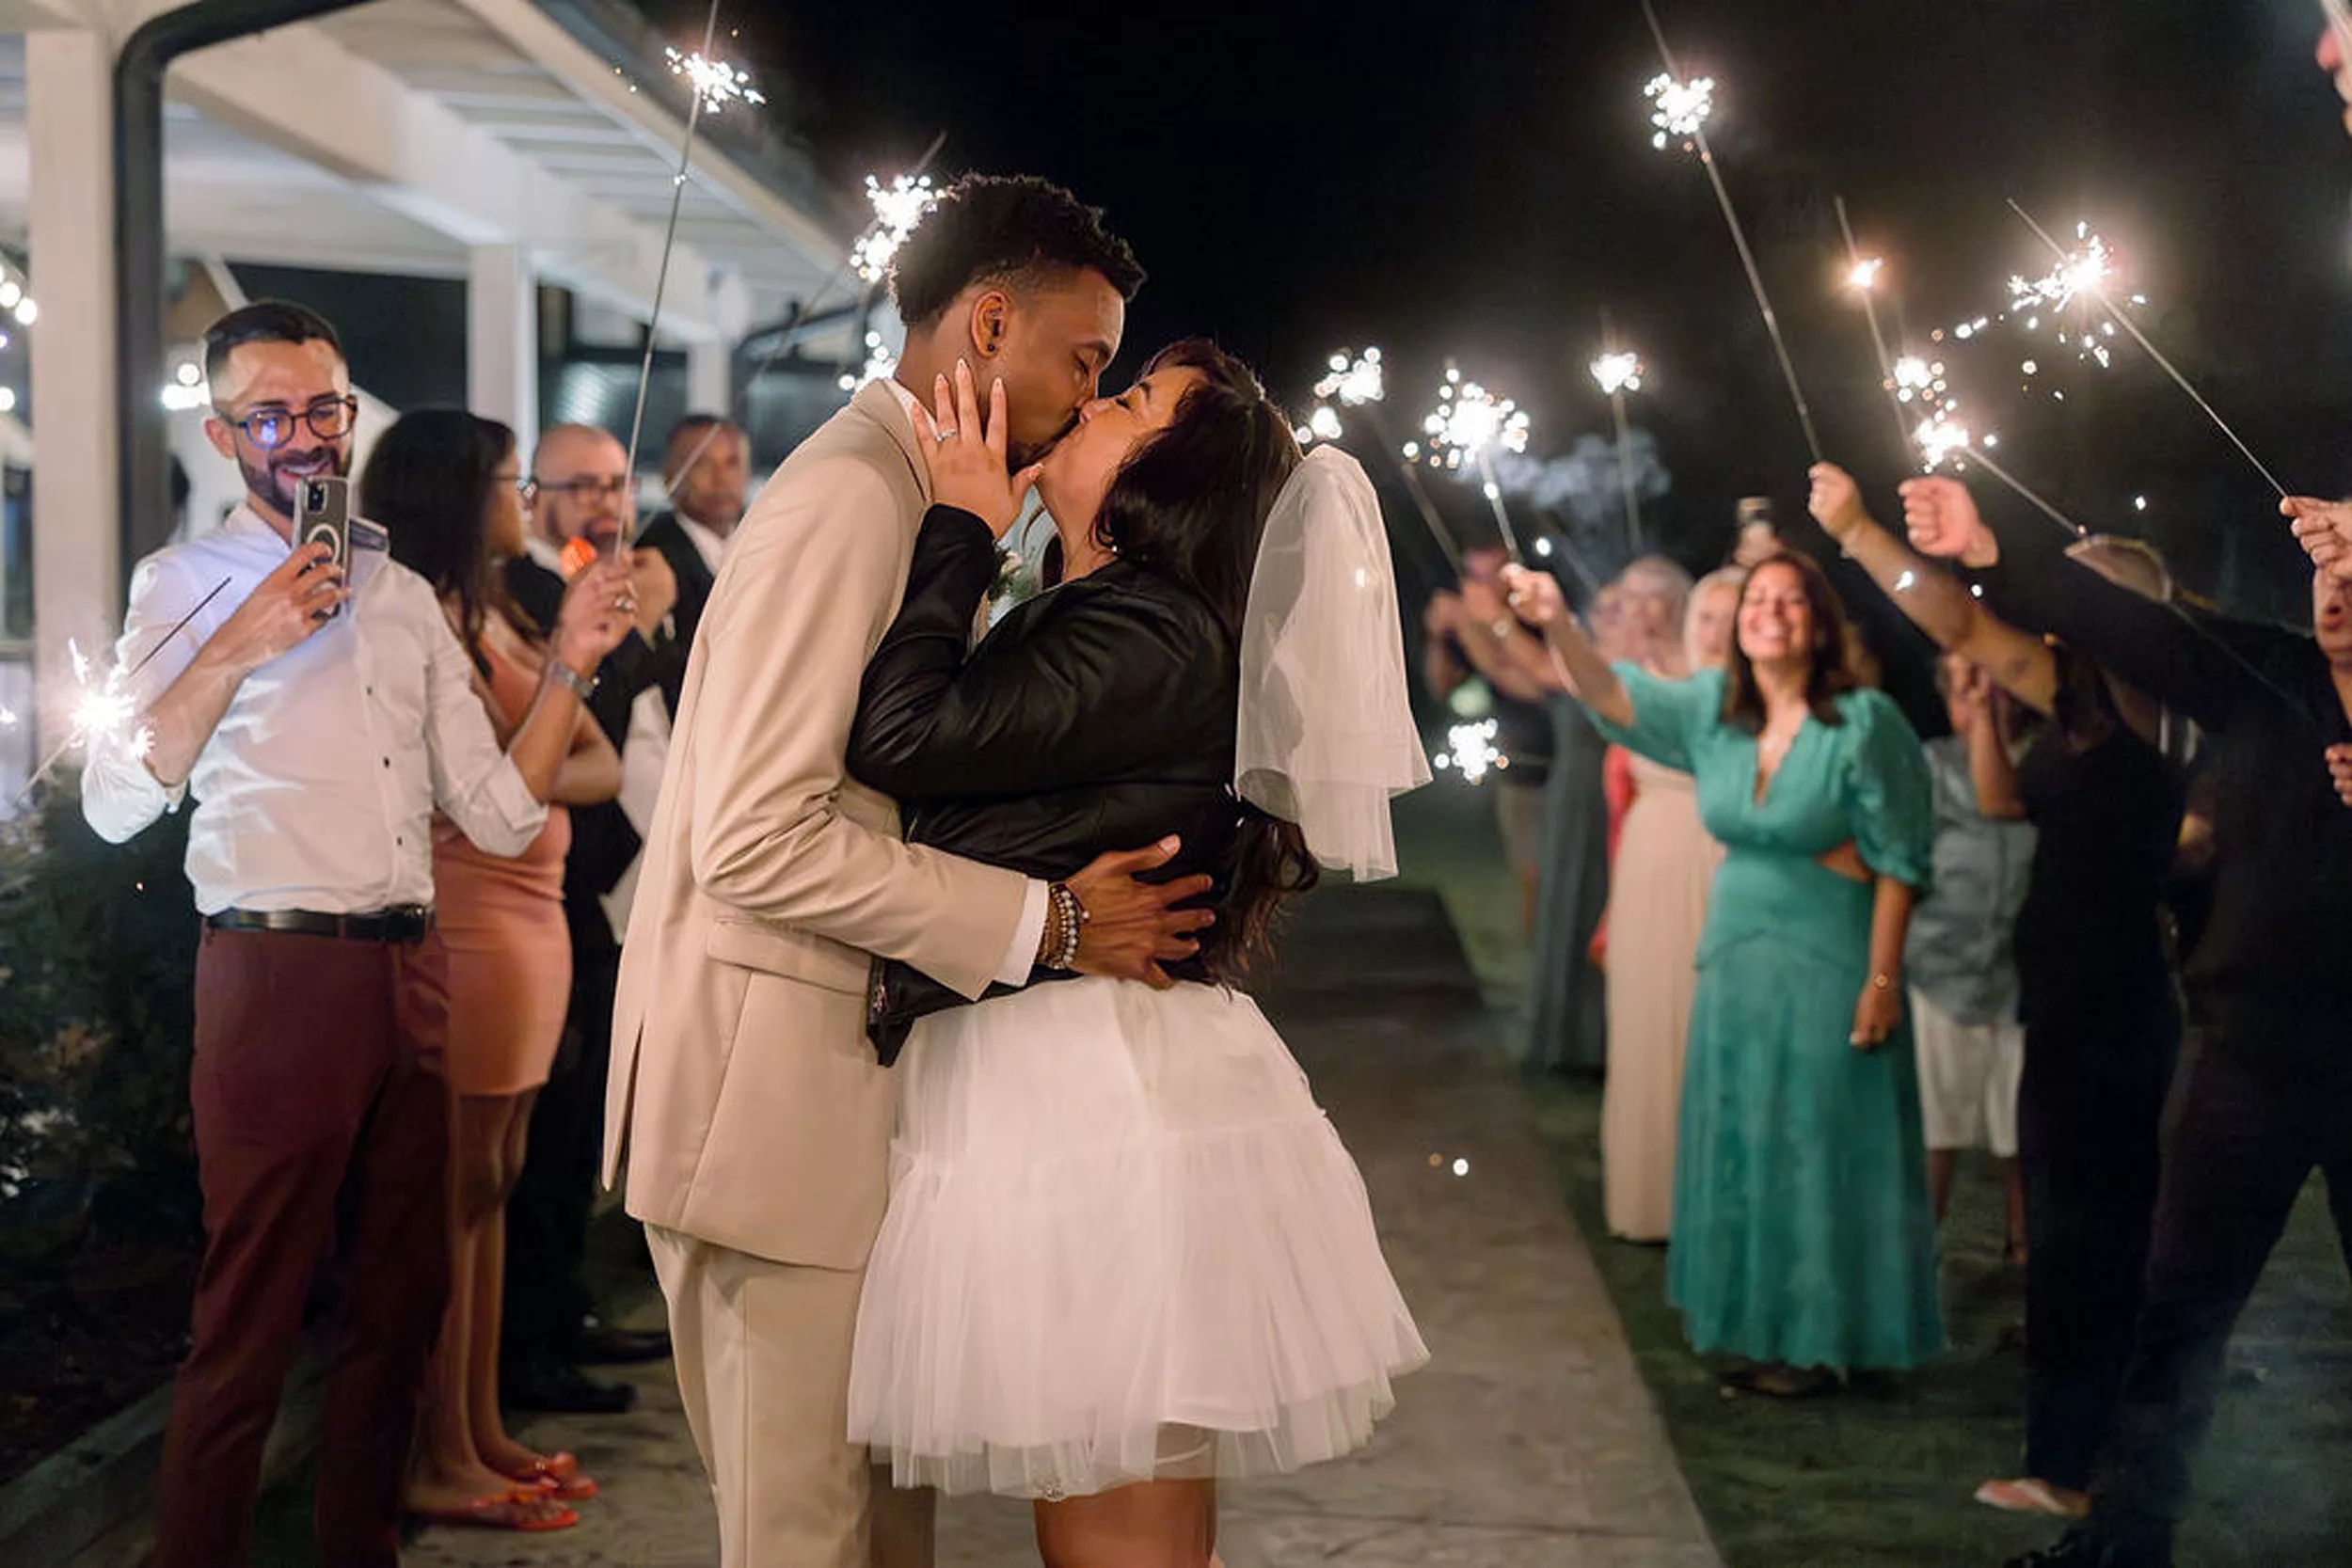 Newlyweds kiss under a shower of sparklers held up by their wedding guests on a sidewalk